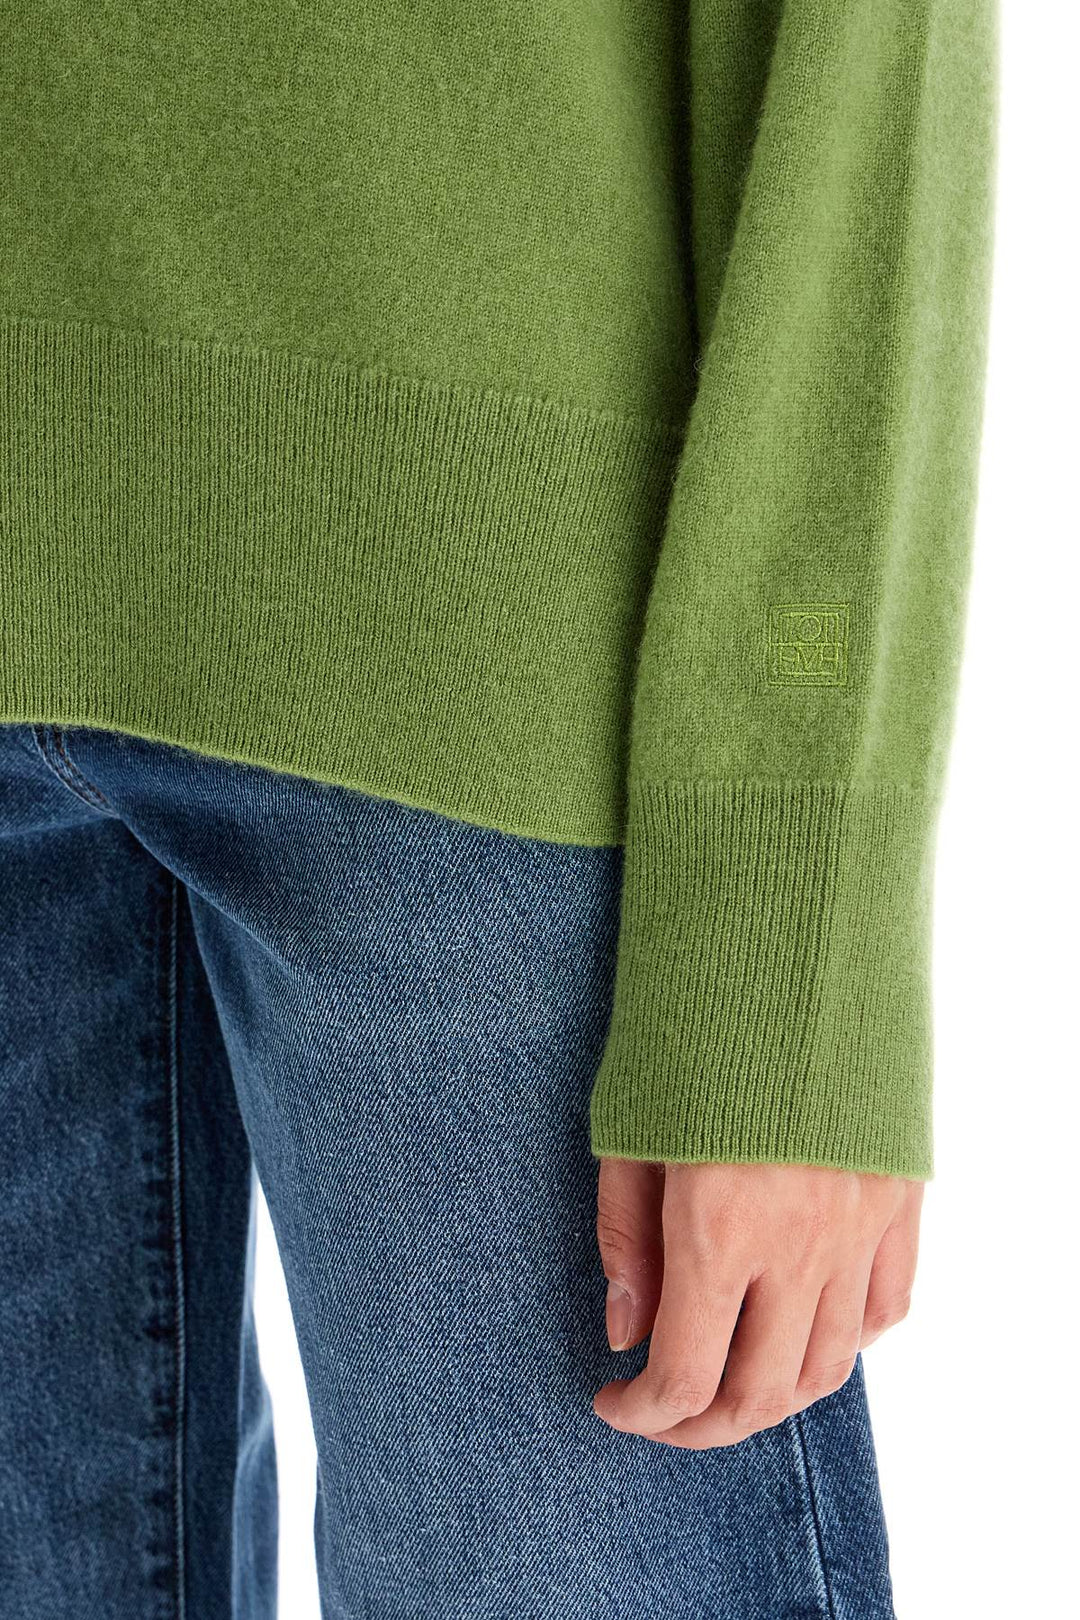 Toteme Crew Neck Cashmere Knit   Green